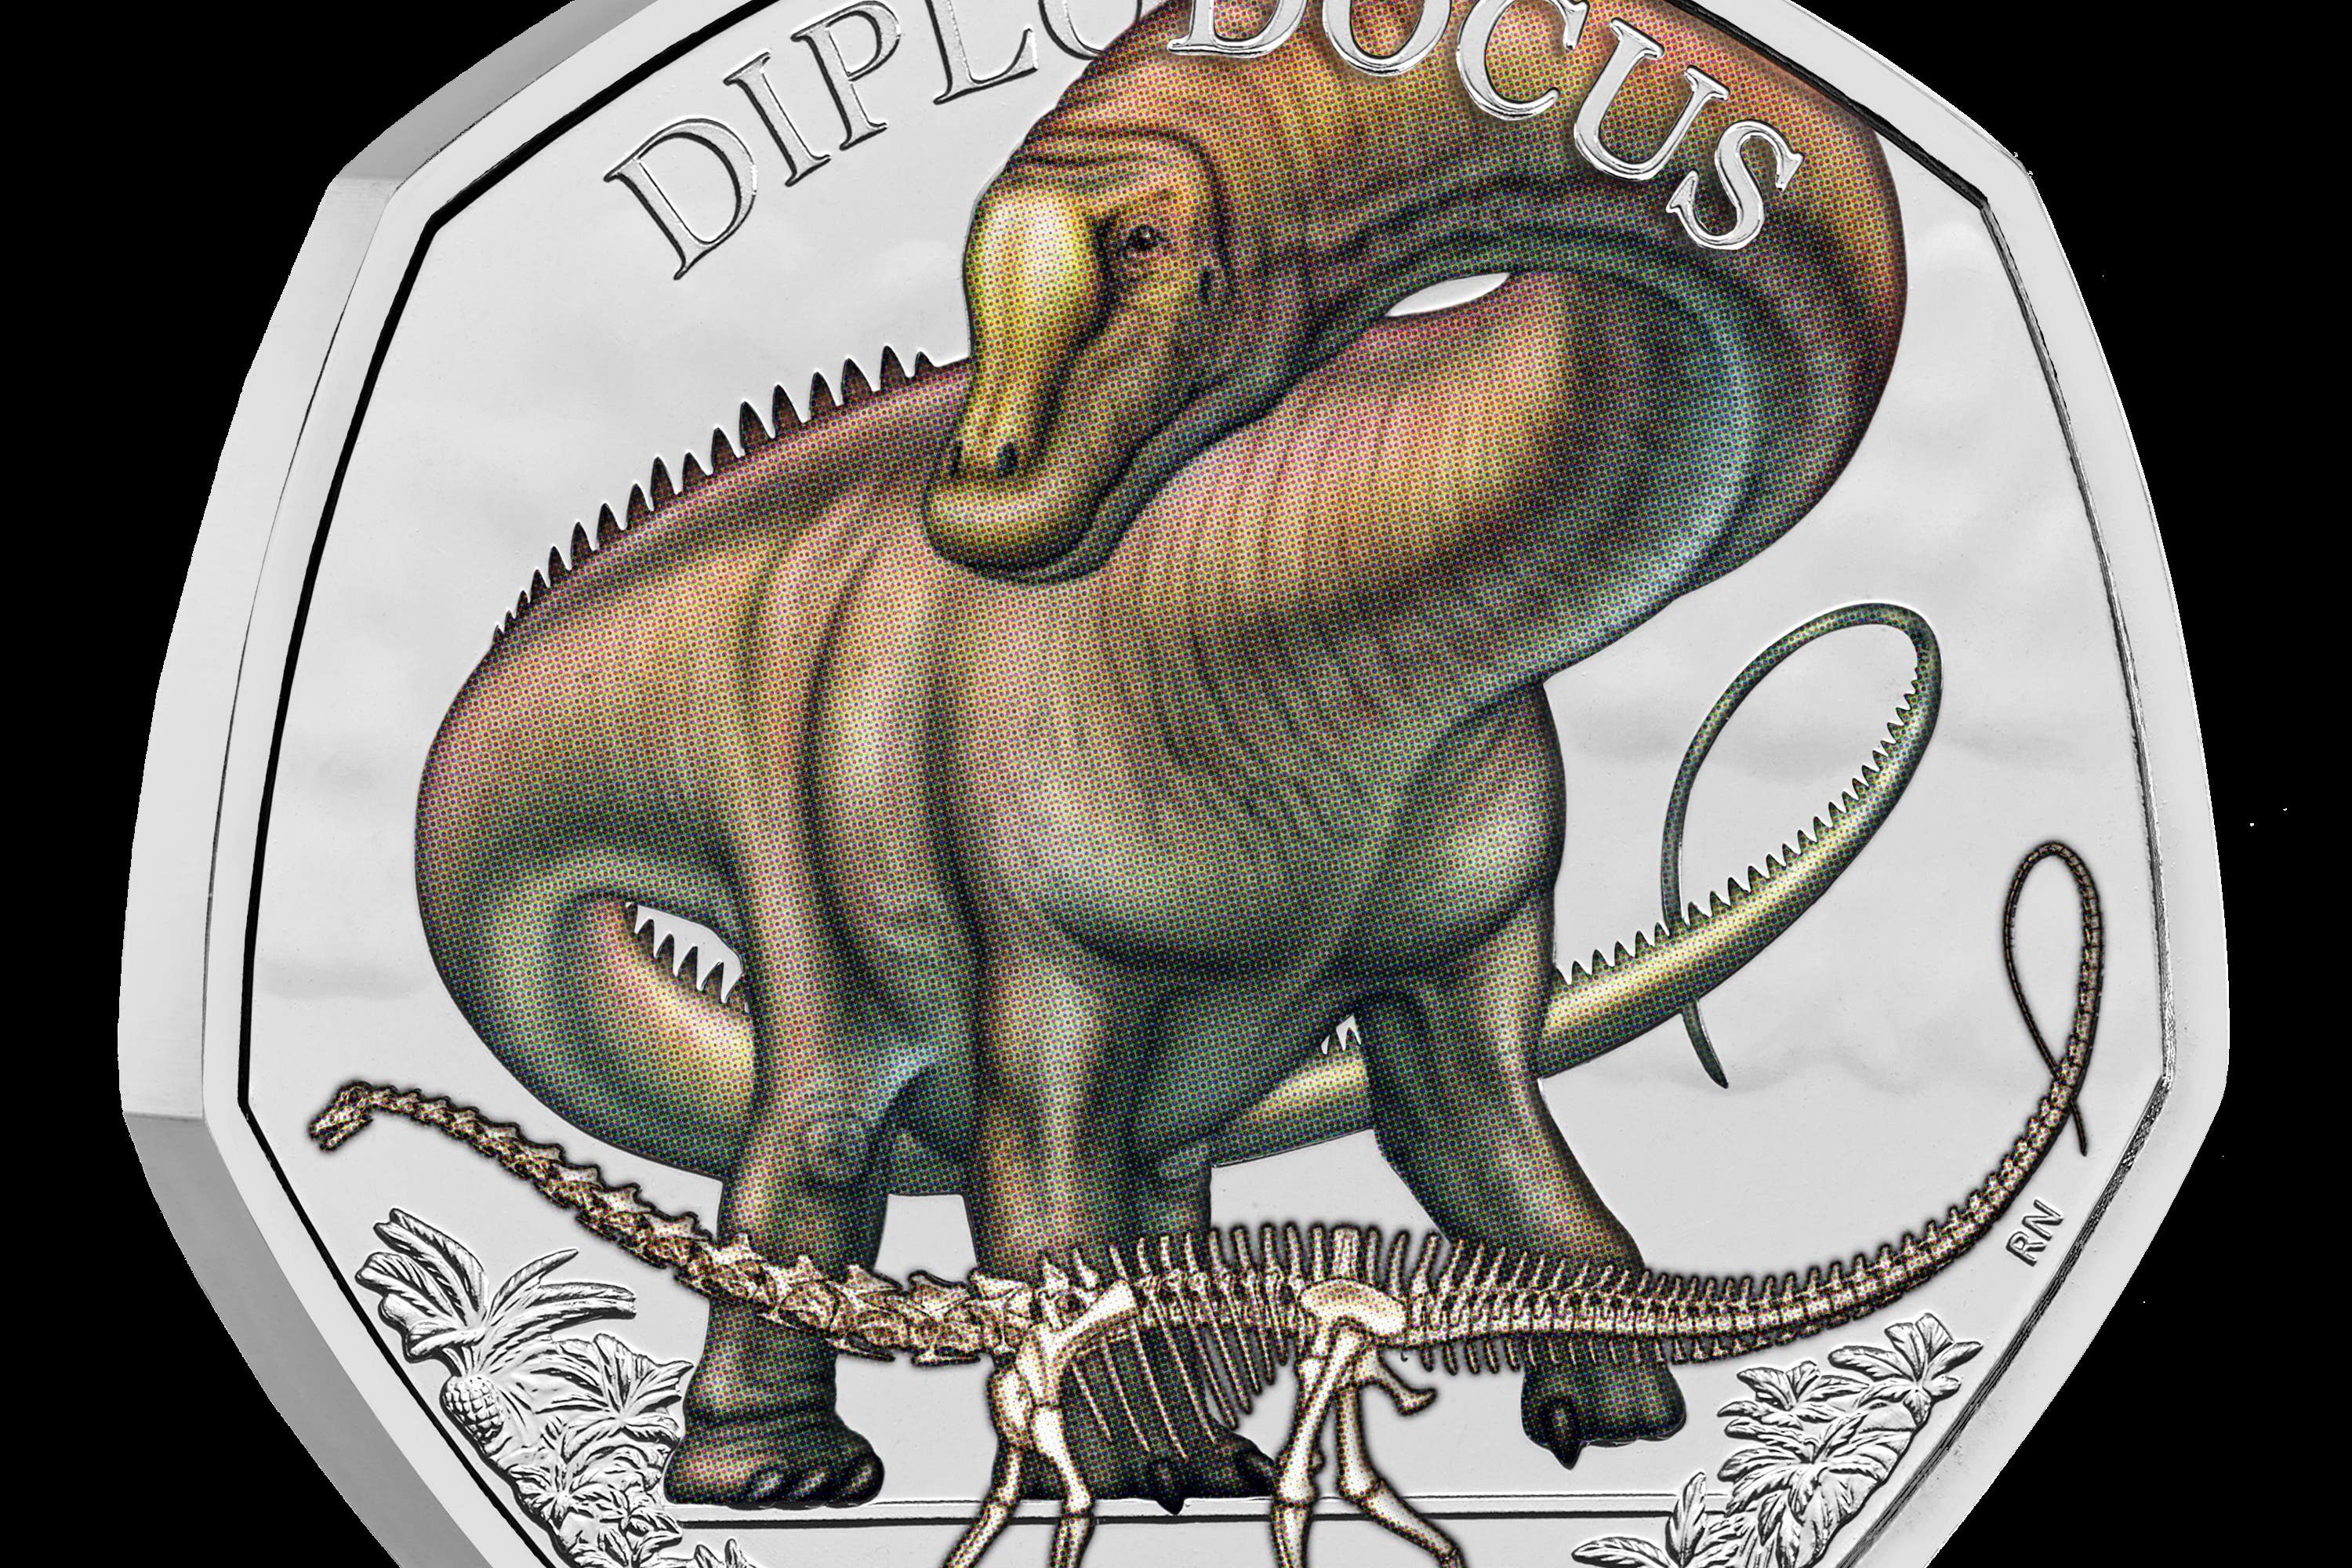 The diplodocus coin is the third and final one in the Royal Mint’s dinosaur range (Royal Mint/PA)